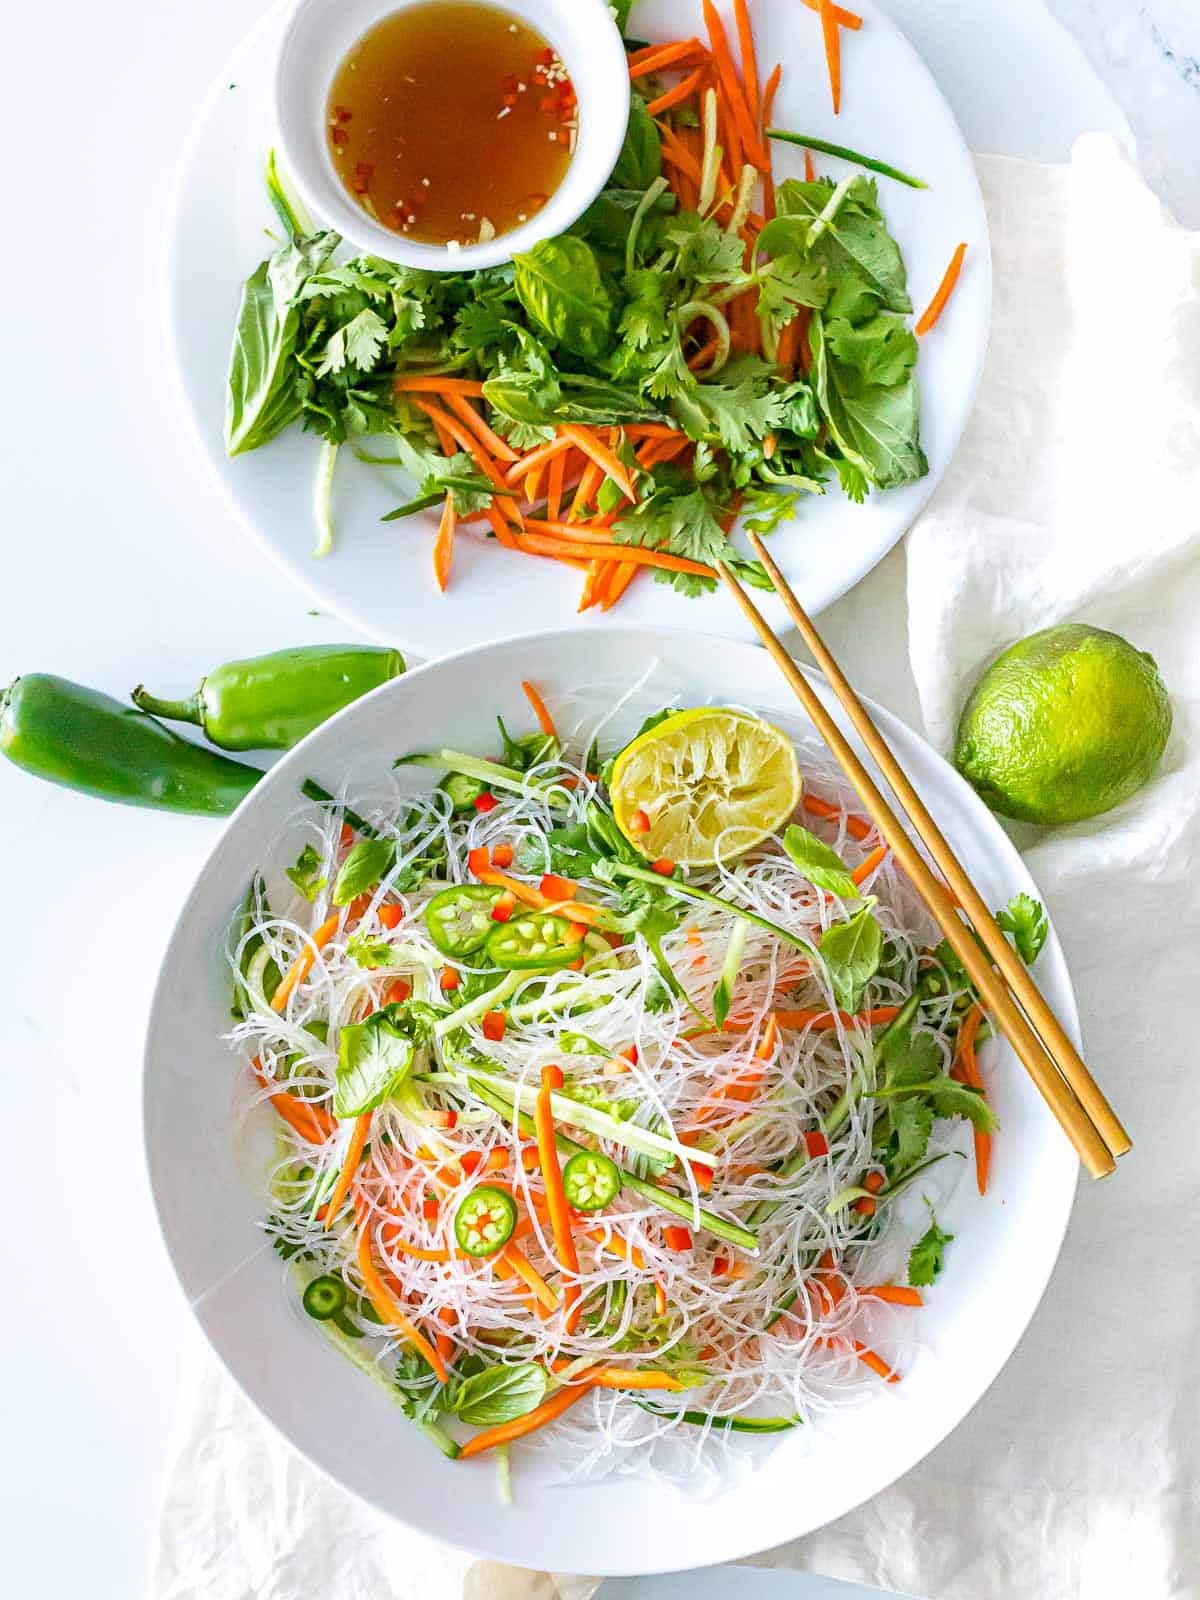 Vietnamese noodle salad with dressing made with vermicelli rice noodles, vegetables, lime, carrots, and fresh herbs in white bowl with wooden chopsticks.